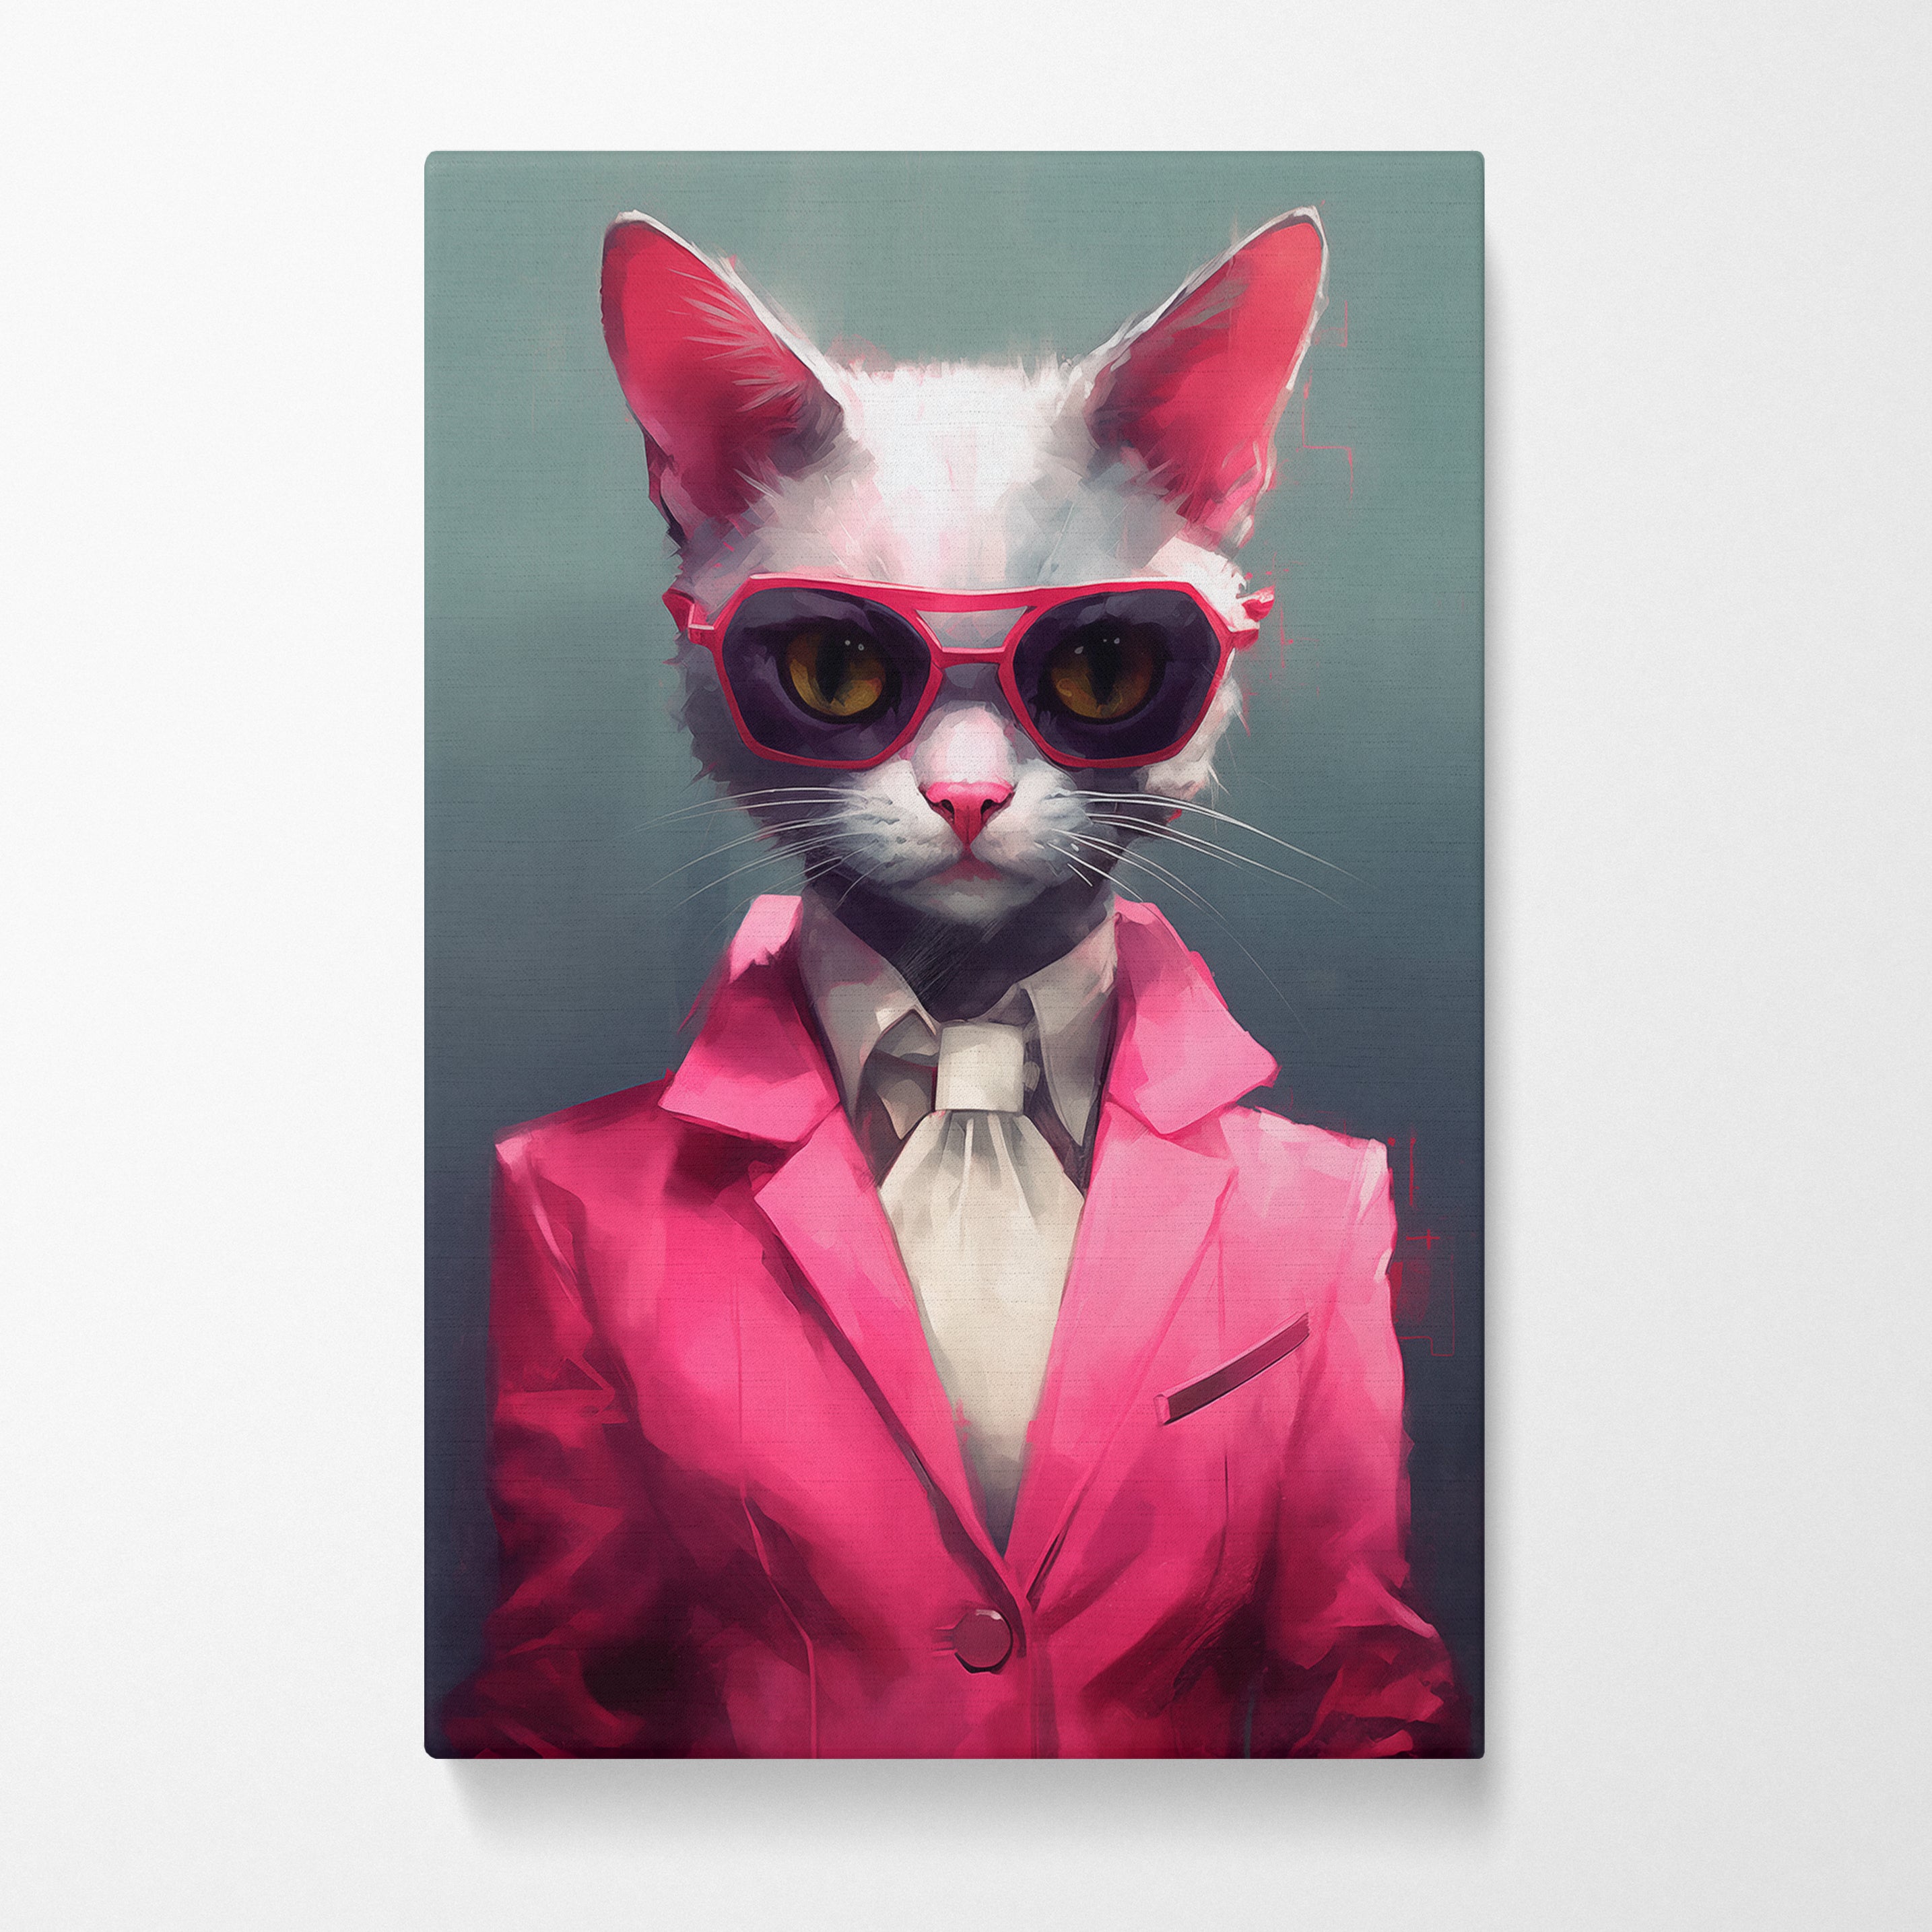 Chic Cat in Pink Suit Canvas Prints Artesty   